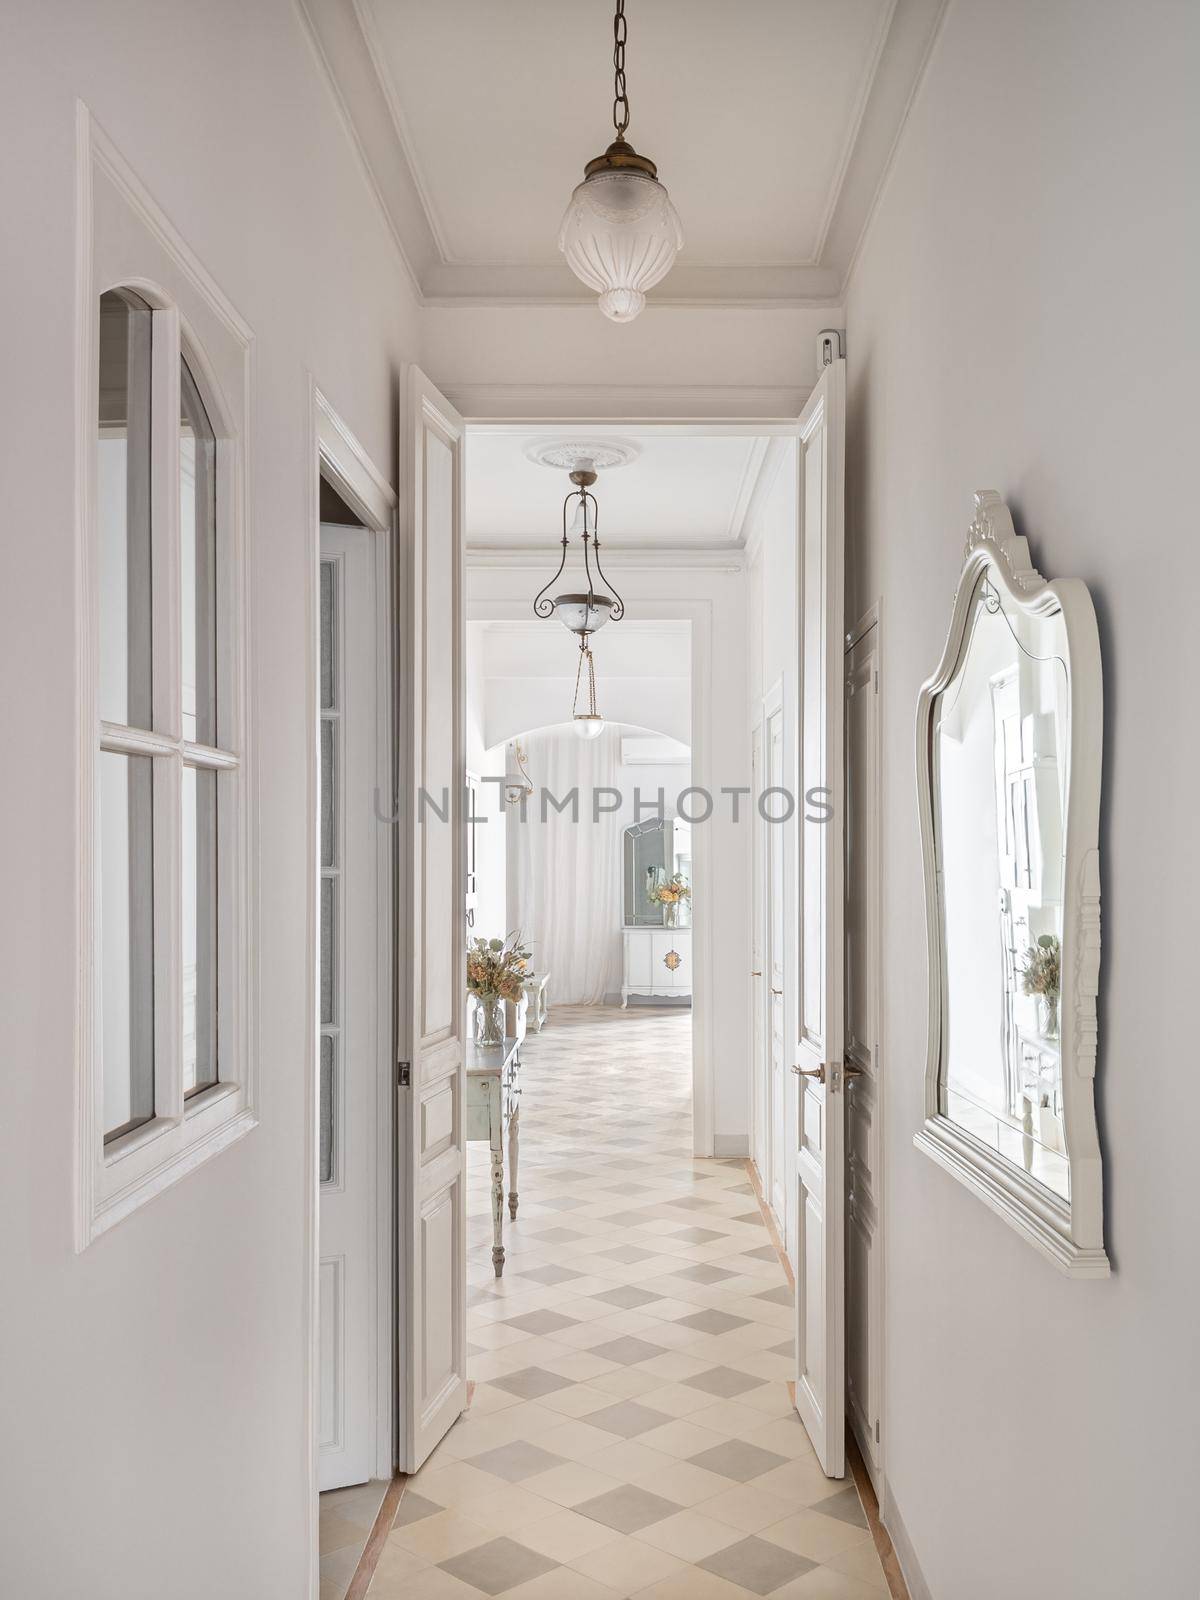 Hallway with vintage chandeliers overlooking a long corridor with many doors to the rooms. by apavlin